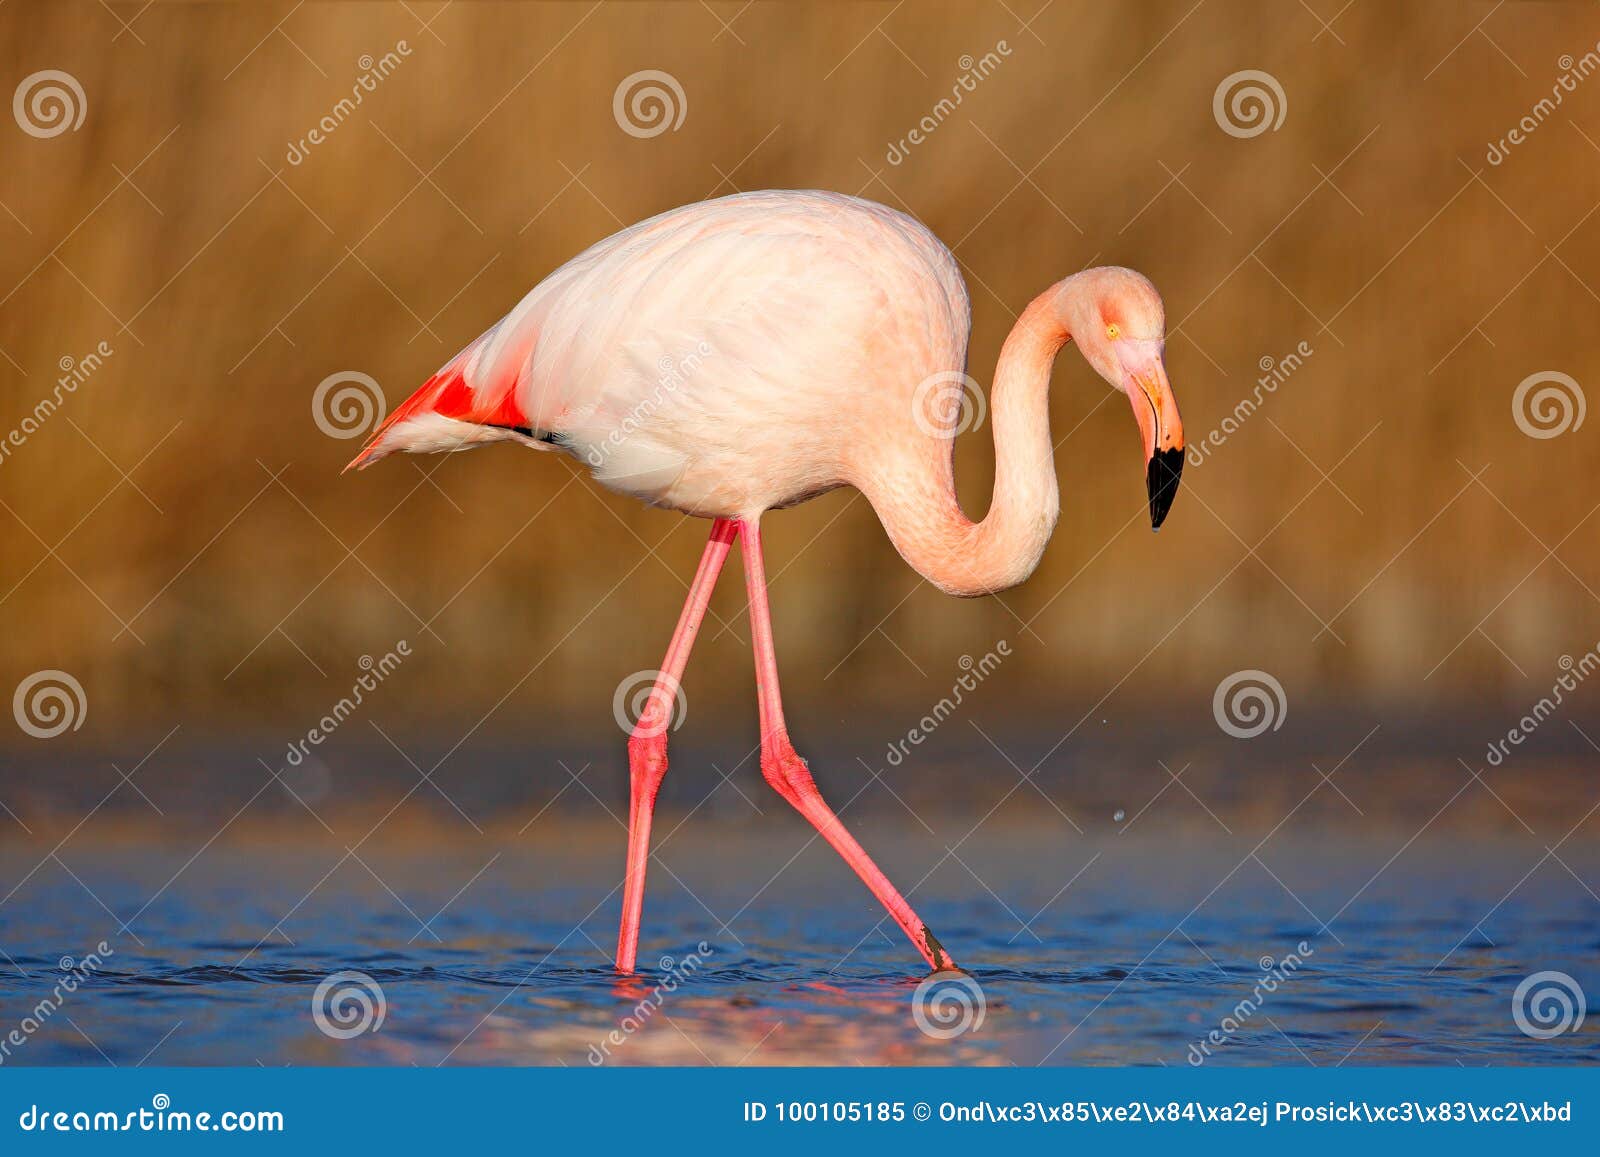 beautiful pink bird in the water. greater flamingo, phoenicopterus ruber, nice pink big bird, head in the water, animal in the nat